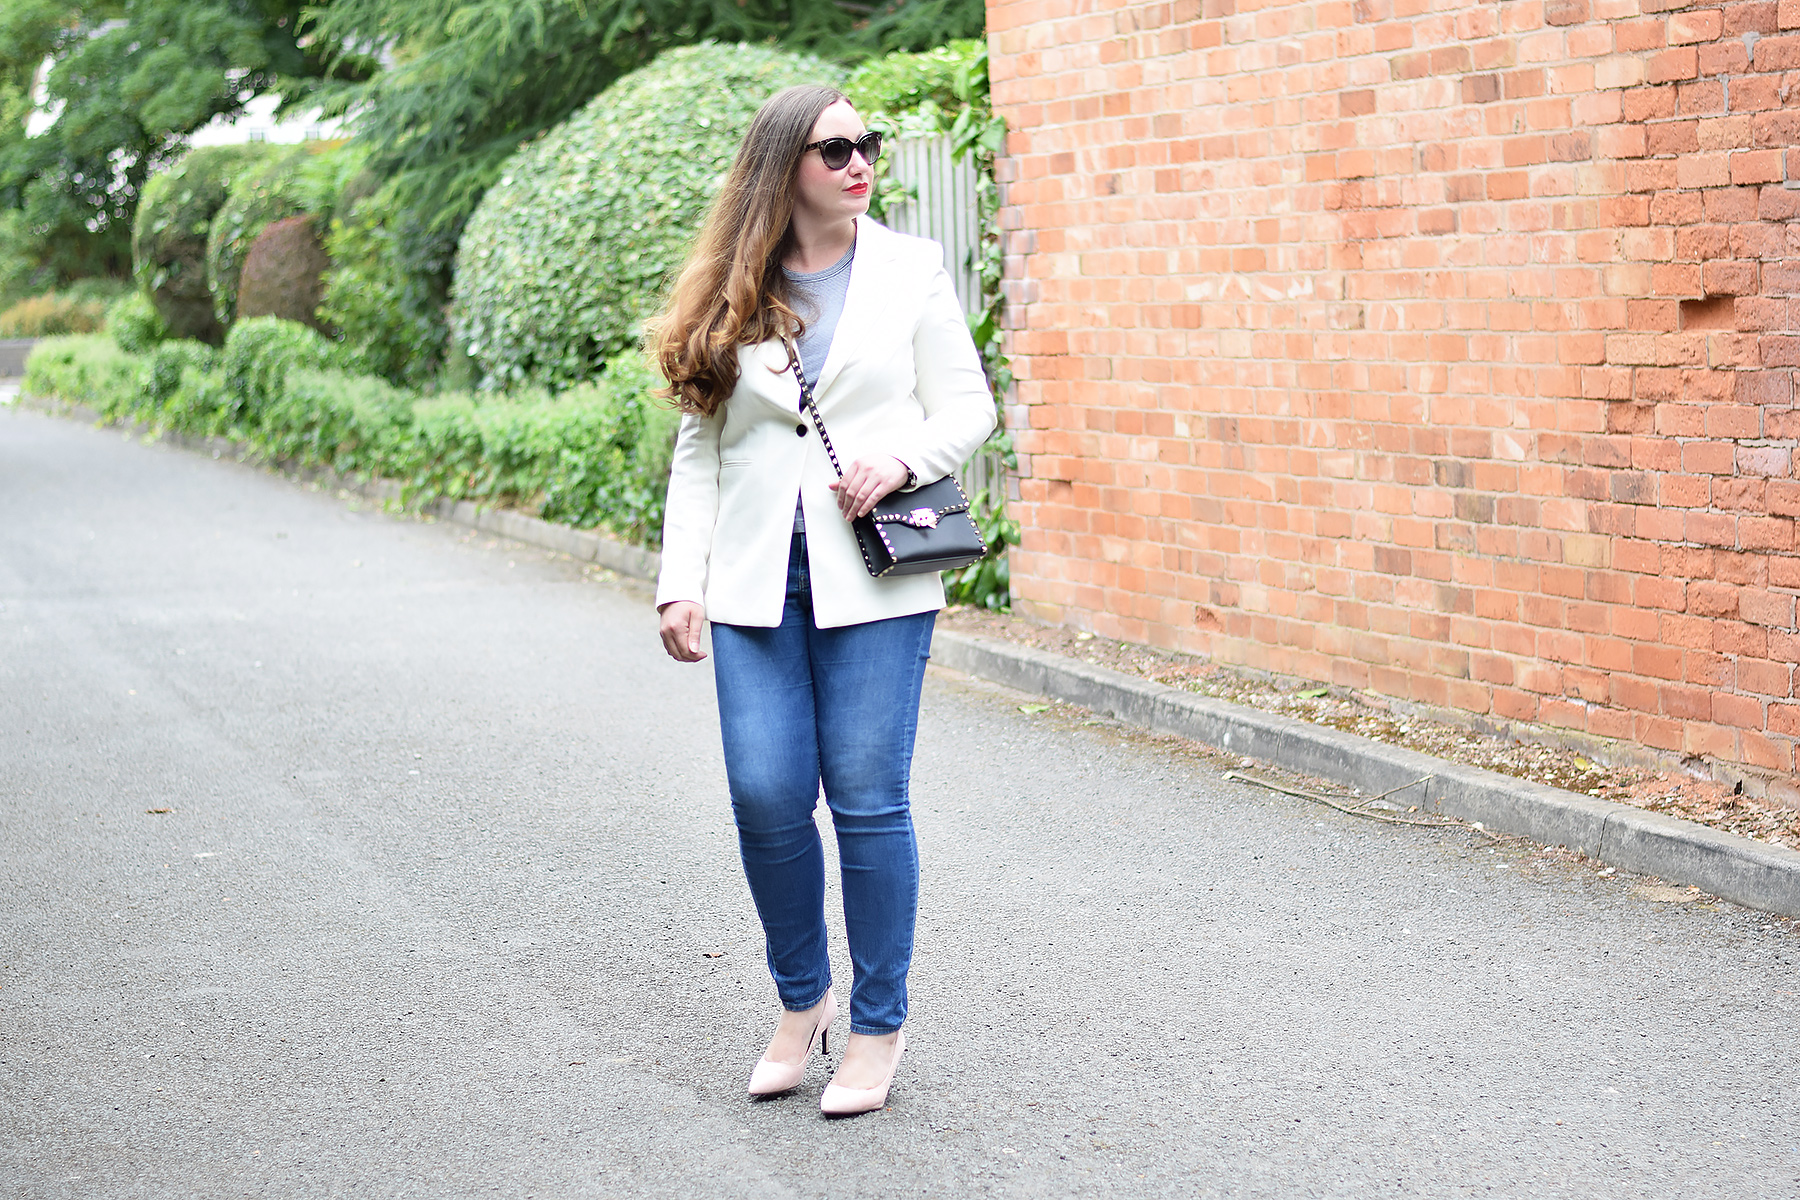 Cream Blazer and jeans outfit